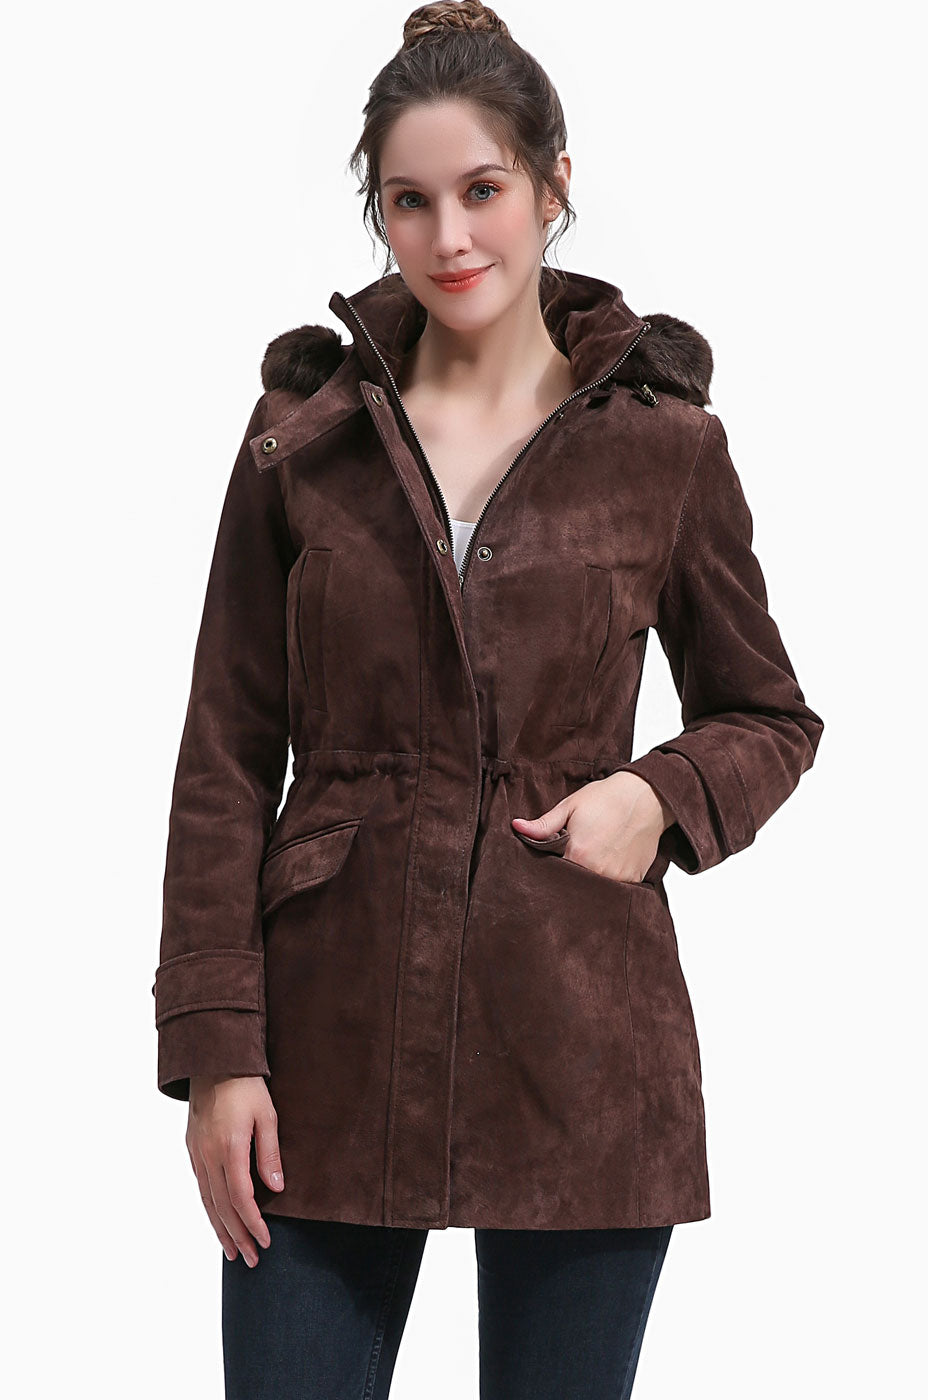 BGSD Women Della Hooded Suede Leather Parka Coat